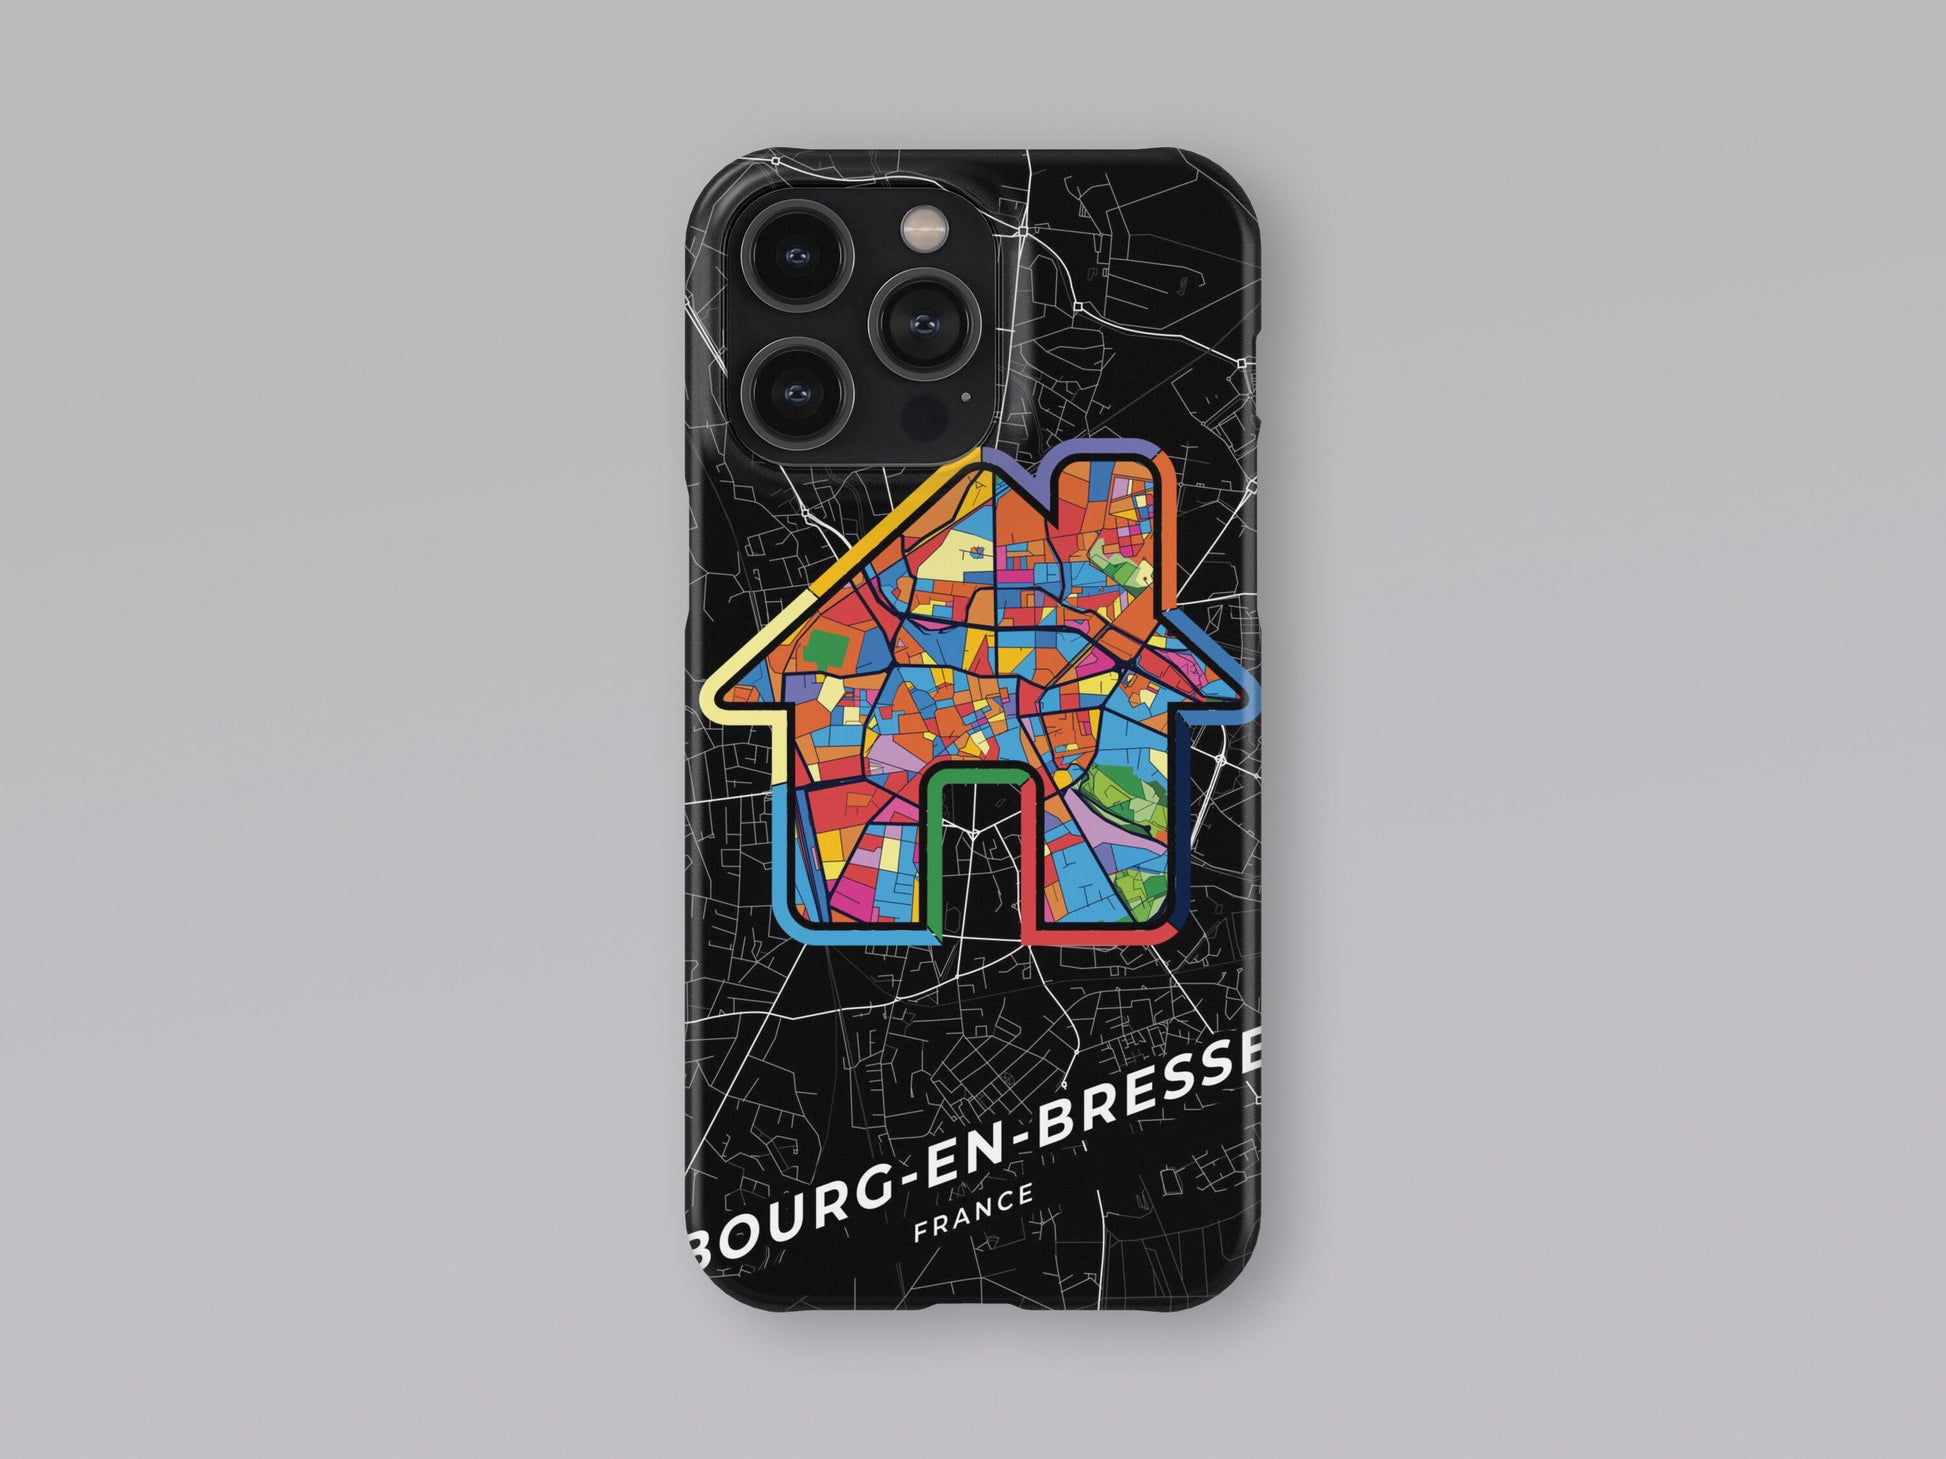 Bourg-En-Bresse France slim phone case with colorful icon. Birthday, wedding or housewarming gift. Couple match cases. 3